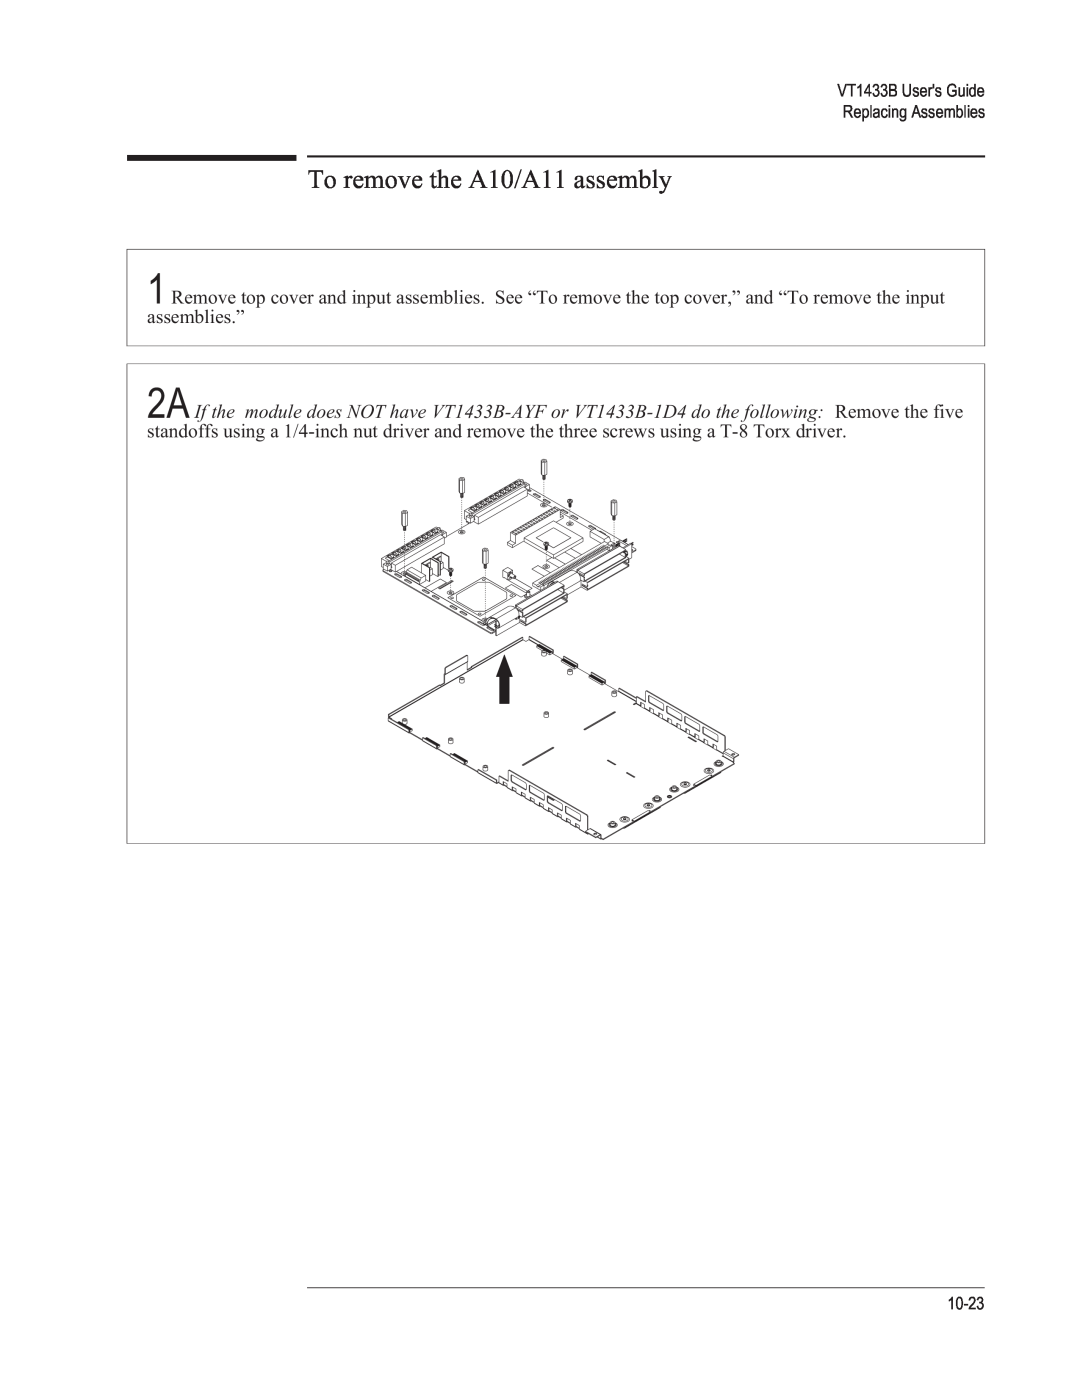 VXI manual To remove the A10/A11 assembly, VT1433B Users Guide Replacing Assemblies, 10-23 